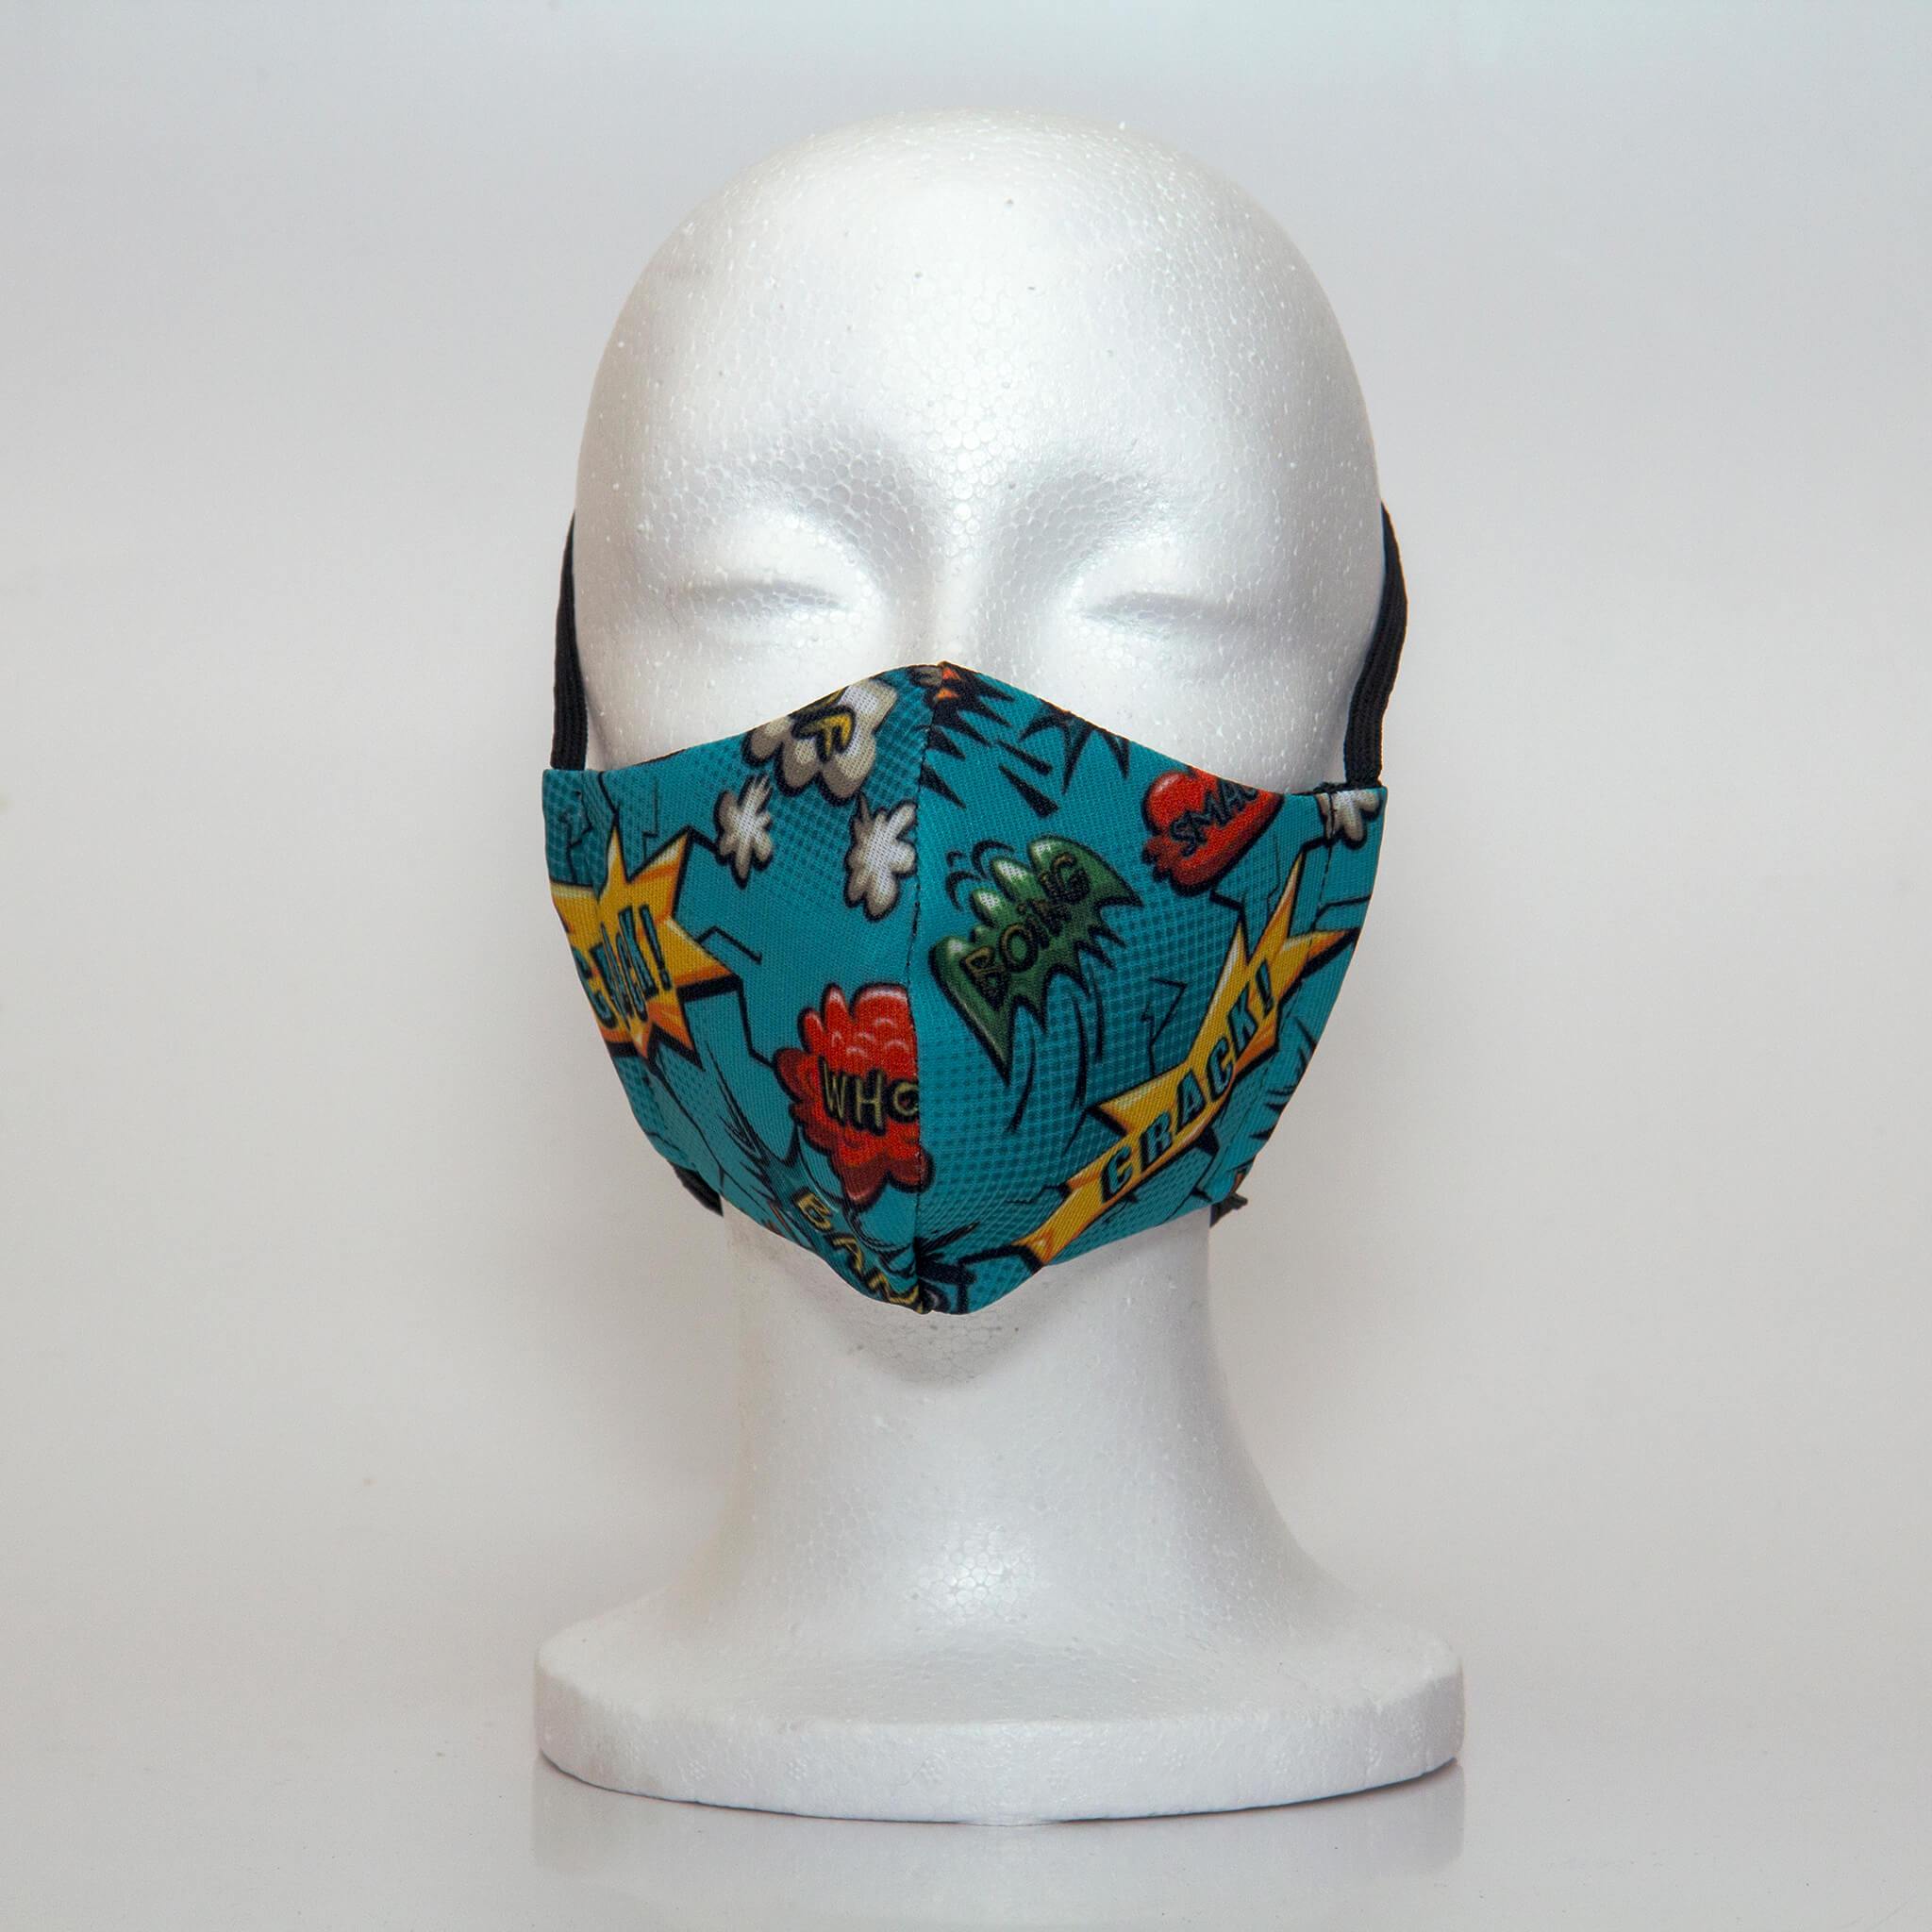 Oltre Print Mask Front View: Comics Blue print. Our Fun comics blue print for the comic book lover. 3 Layer fabric mask with a middle filter layer that is contoured to fit comfortably on your face. Mask will fit pre-teen boys between 7 to 12 years old.